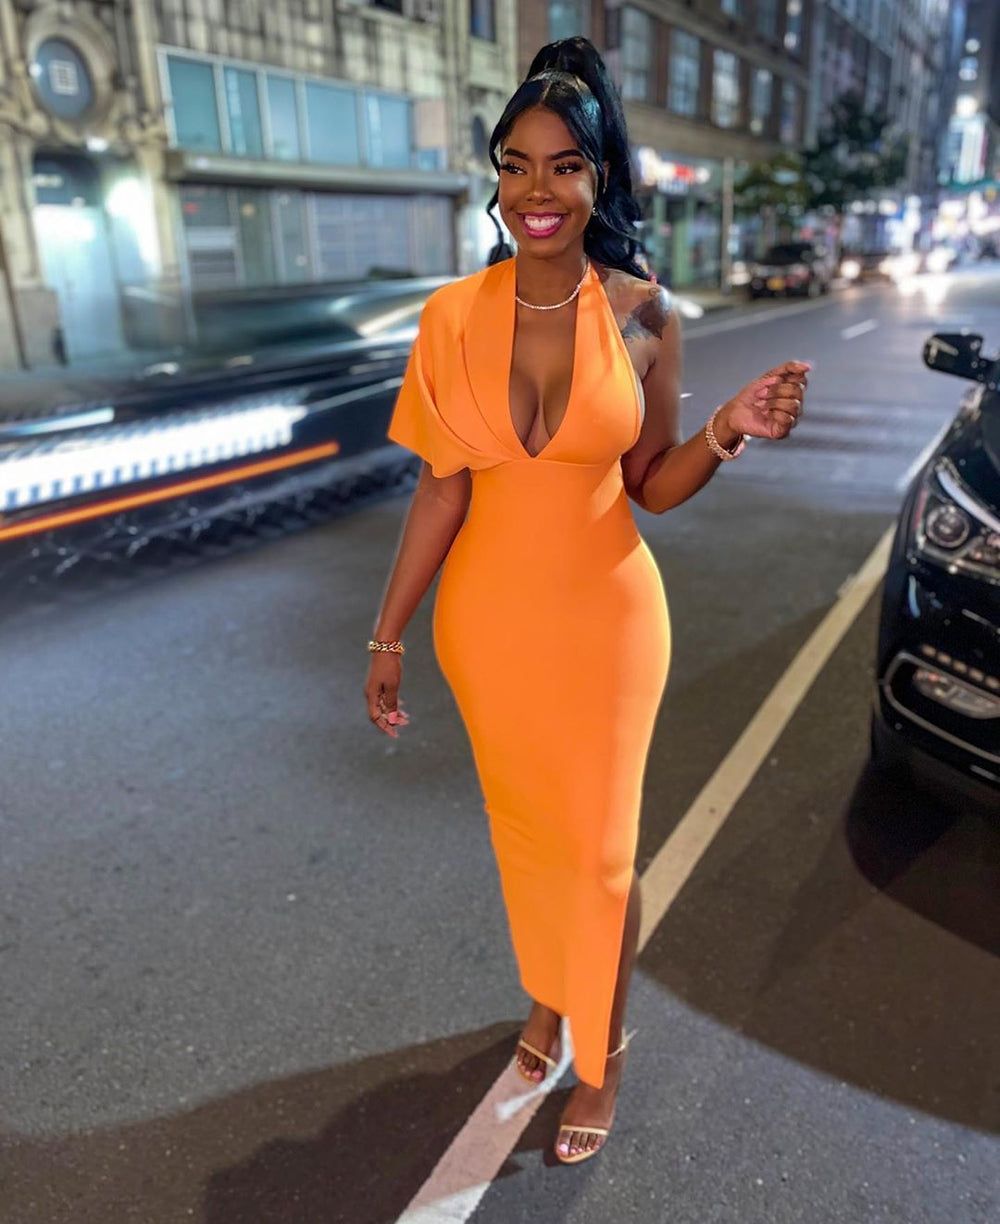 Stylish Orange Dress Outfits Perfect for Every Woman’s Wardrobe